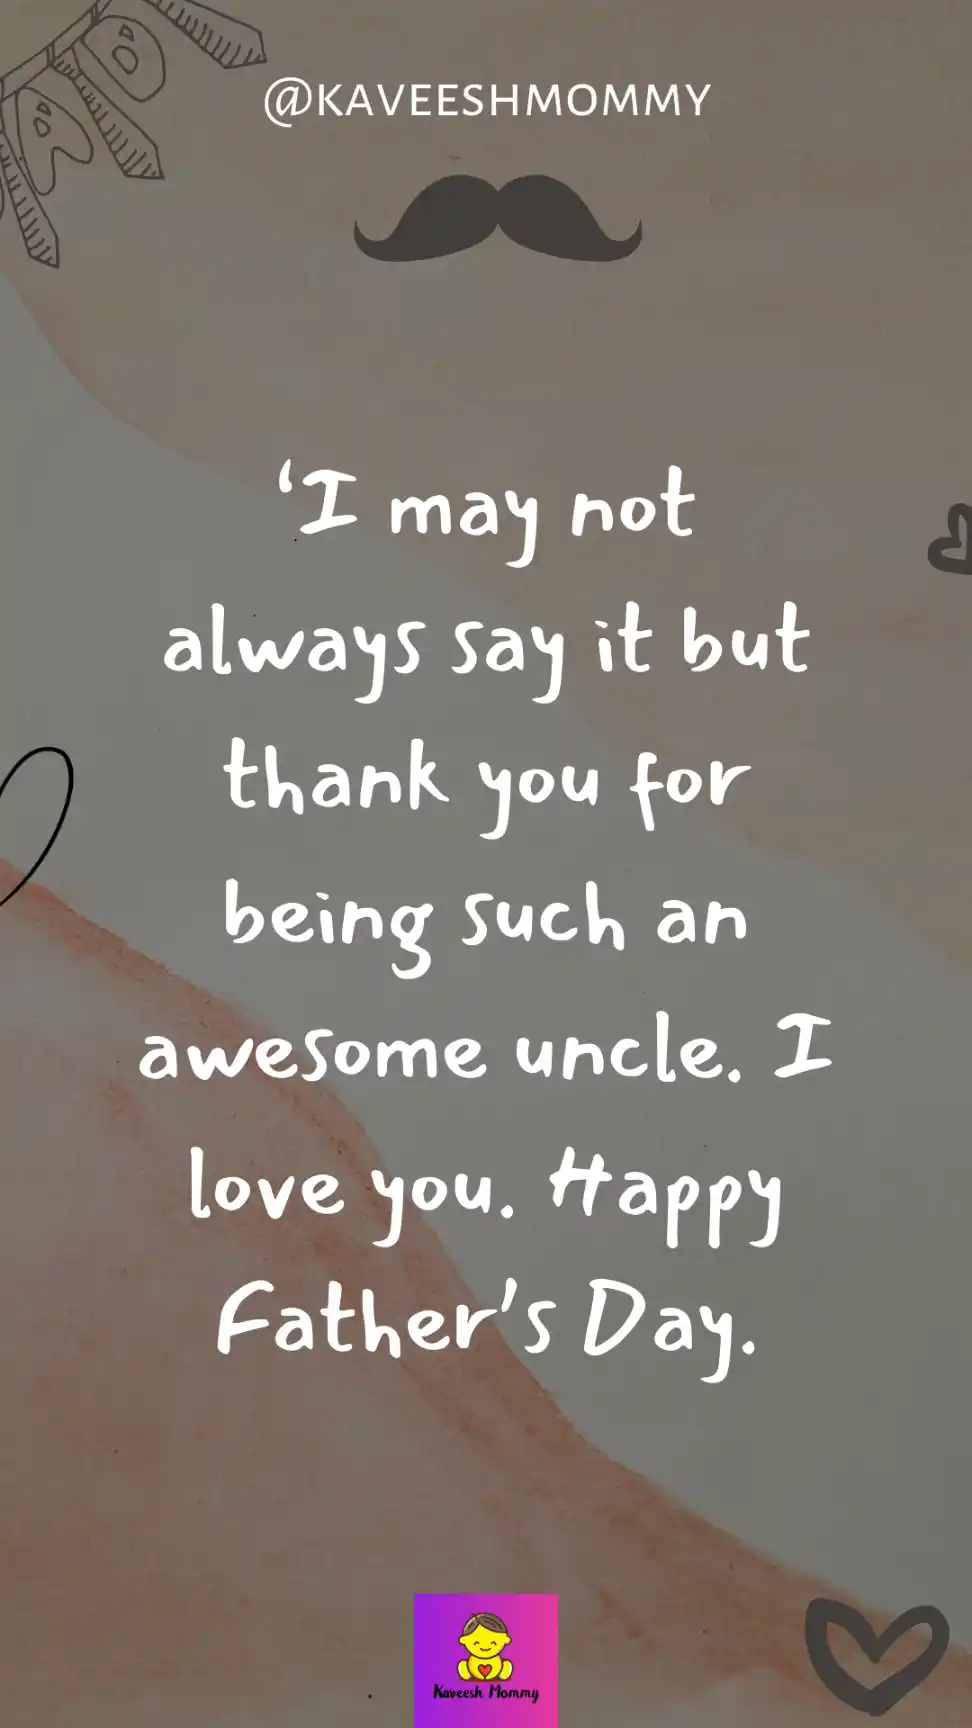 How do you praise an uncle?